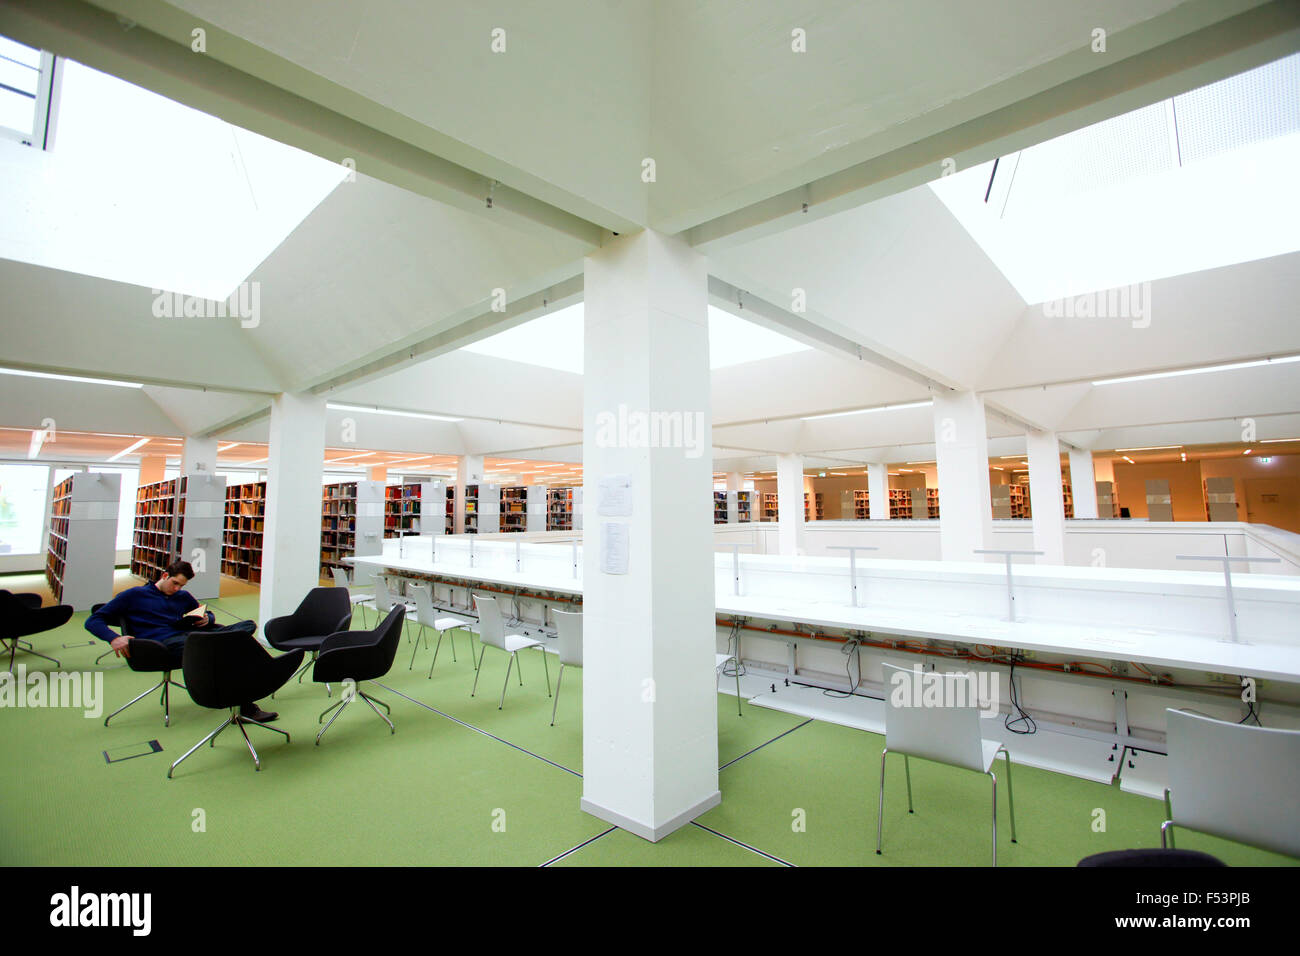 27.04.2015, Berlin, Berlin, Germany - Freie UniversitŠt (FU) Berlin presents the new building for small pockets and the campus library. 0PA150427D669CAROEX.JPG - NOT for SALE in G E R M A N Y, A U S T R I A, S W I T Z E R L A N D [MODEL RELEASE: NO, PROPERTY RELEASE: NO (c) caro photo agency / Ponizak, http://www.caro-images.pl, info@carofoto.pl - In case of using the picture for non-journalistic purposes, please contact the agency - the picture is subject to royalty!] Stock Photo